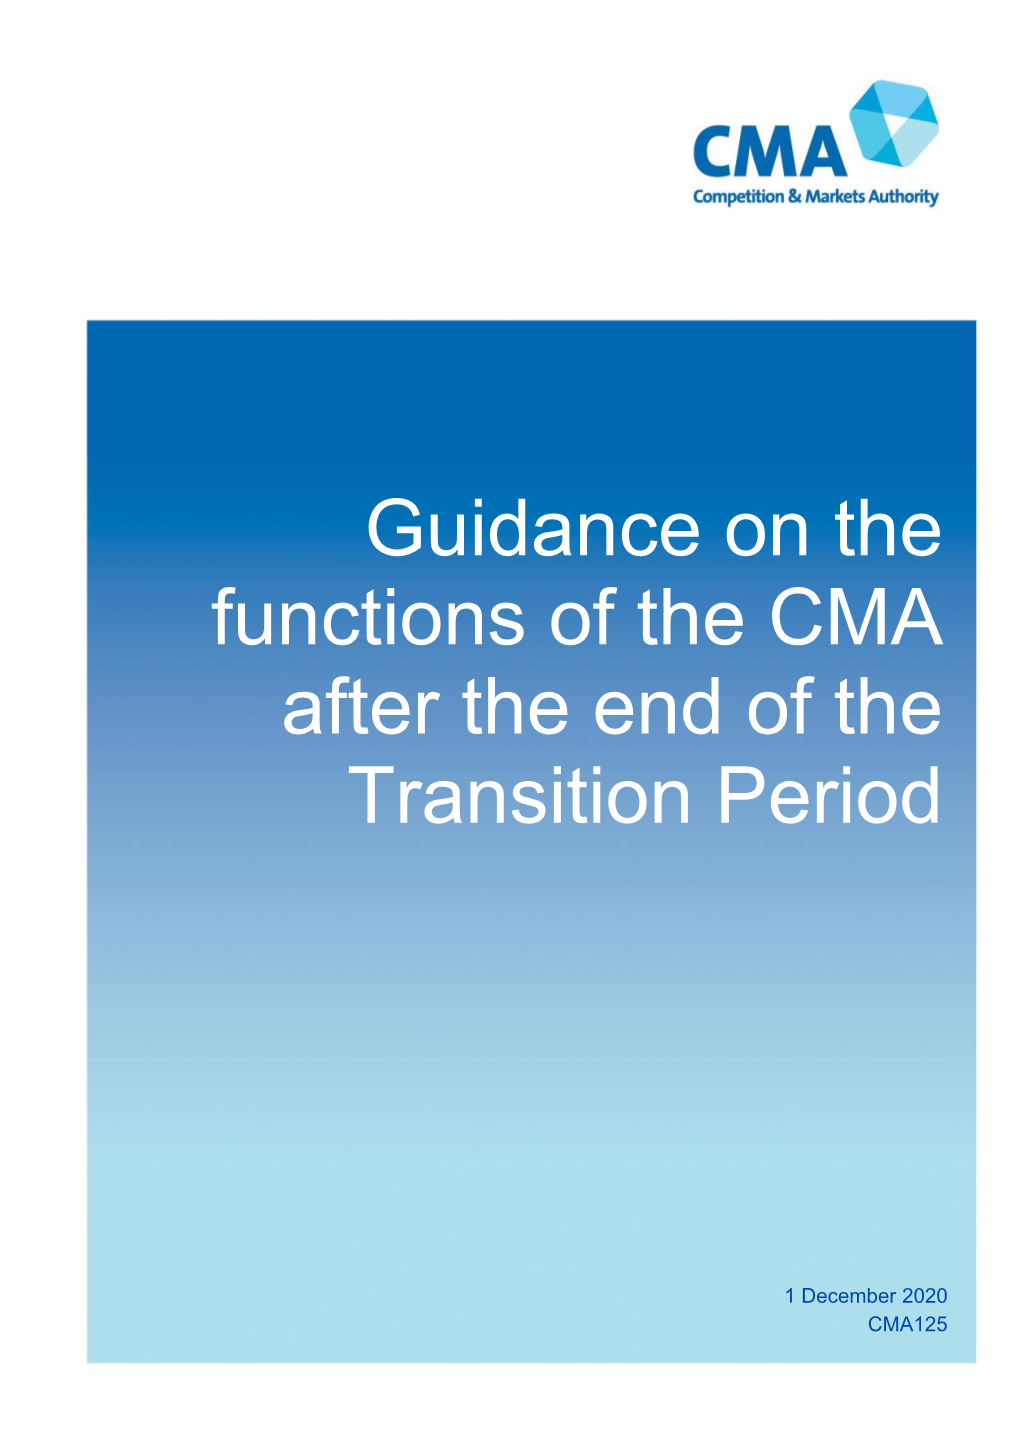 Guidance on the Functions of the CMA After the End of the Transition Period